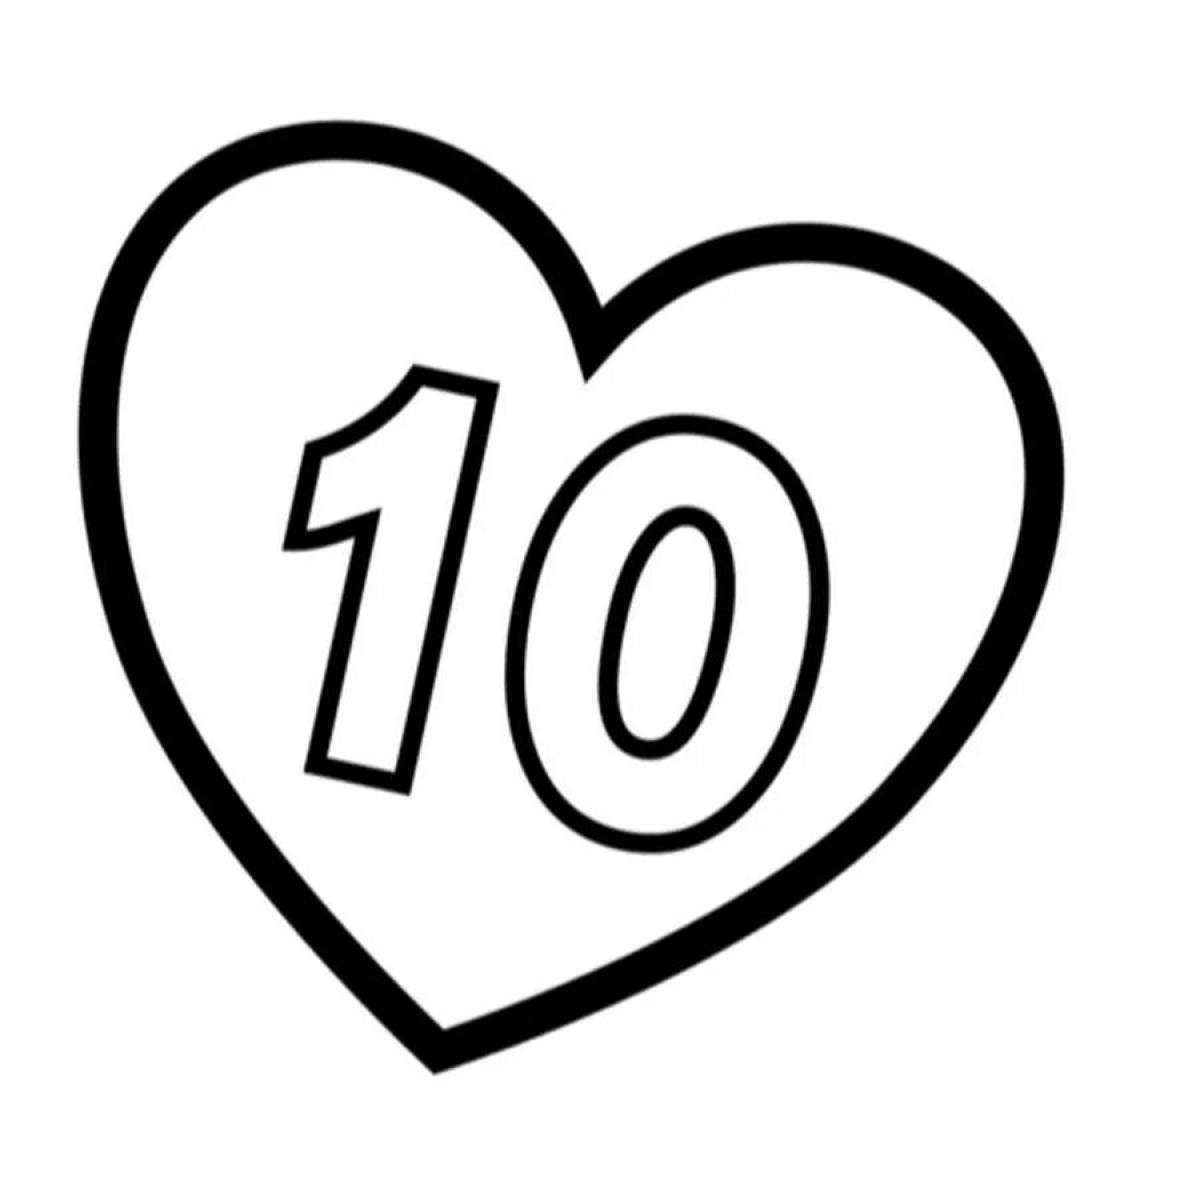 For 100 years #6